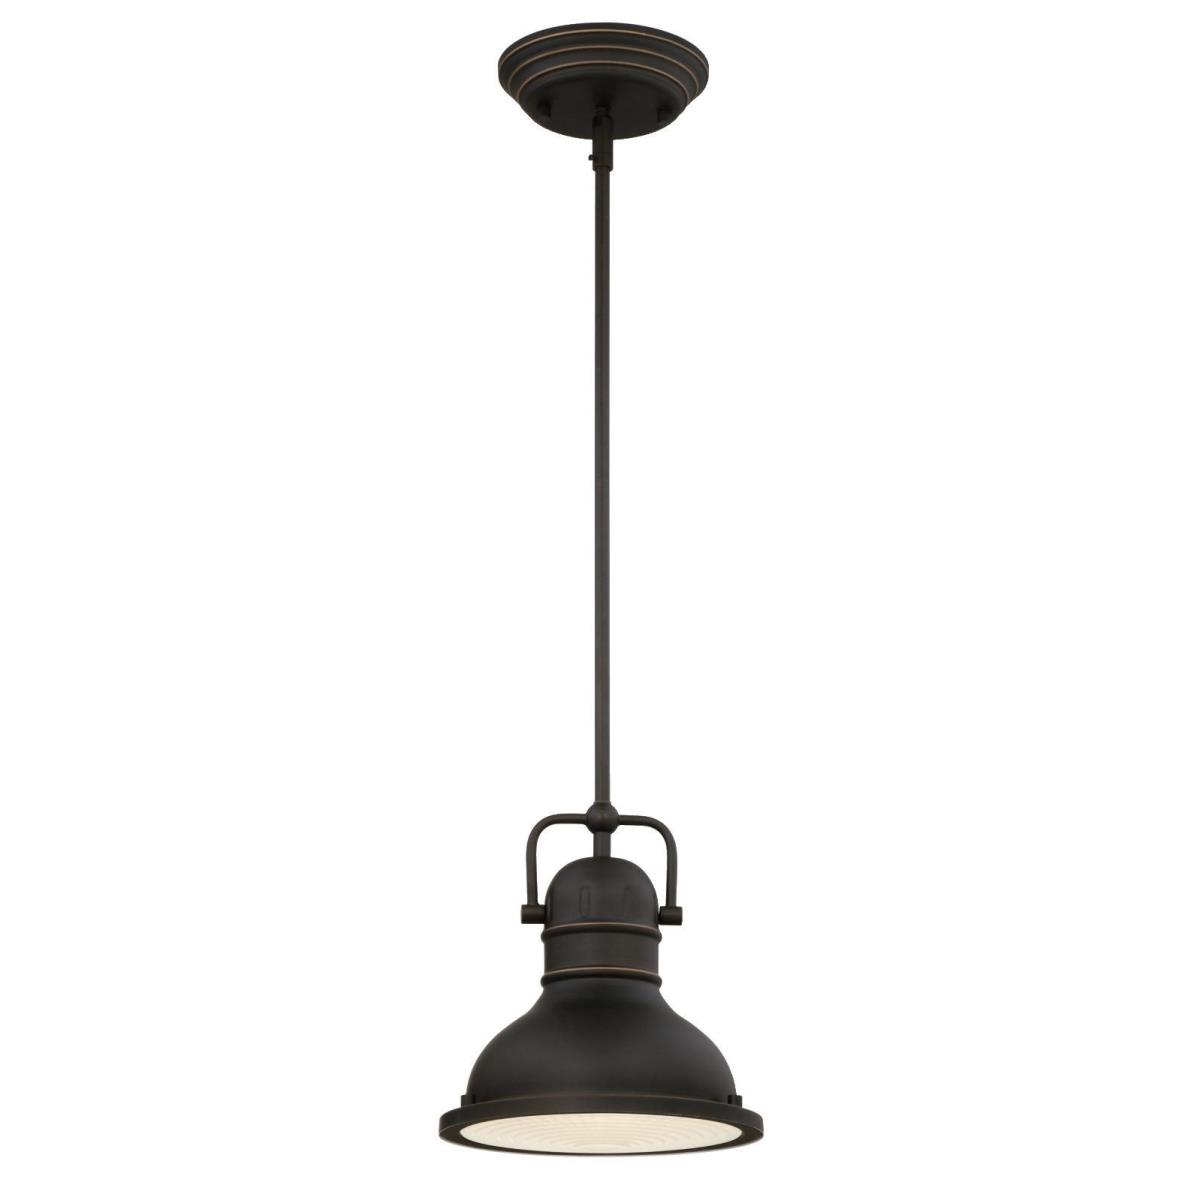 1 Light LED Mini Pendant Oil Rubbed Bronze Finish with Highlights and Prismatic Lens